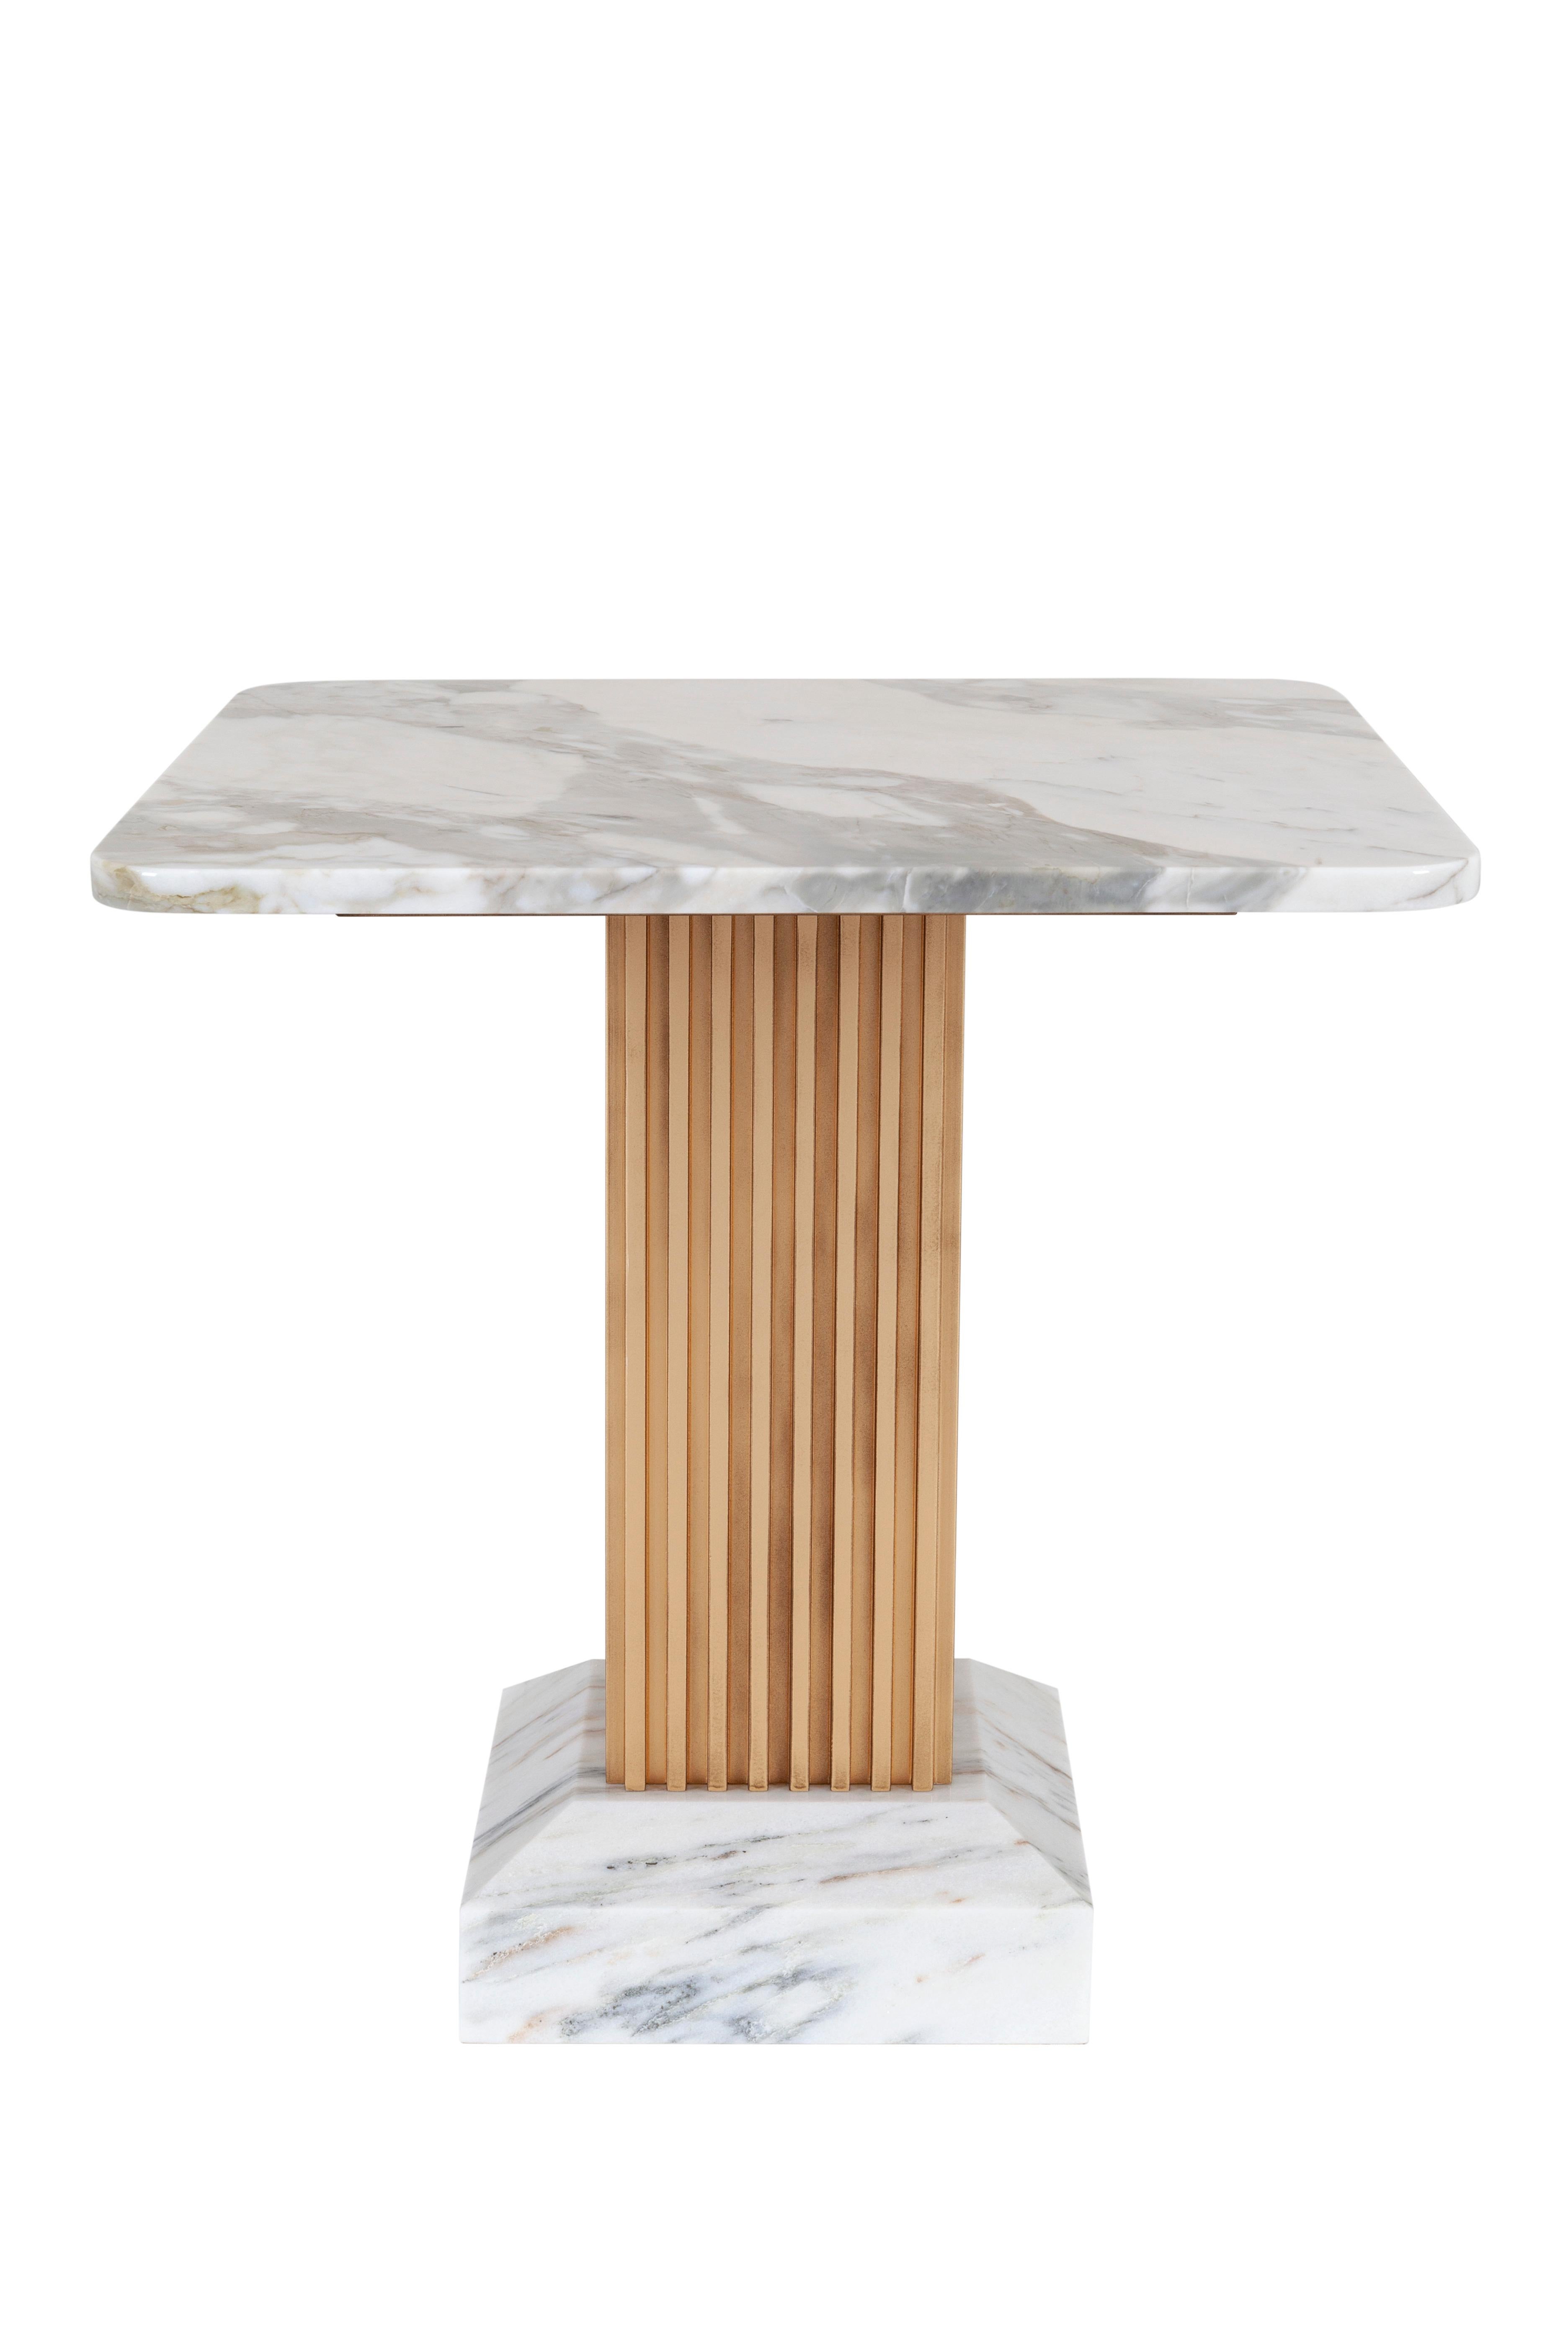 Dórica Bar Table, Modern Collection, Handcrafted in Portugal - Europe by GF Modern.

Like an architectural monument of the Ancient Greece, the Dórica Bar Table is a majestic piece that makes its imposing presence in your living space. The gold